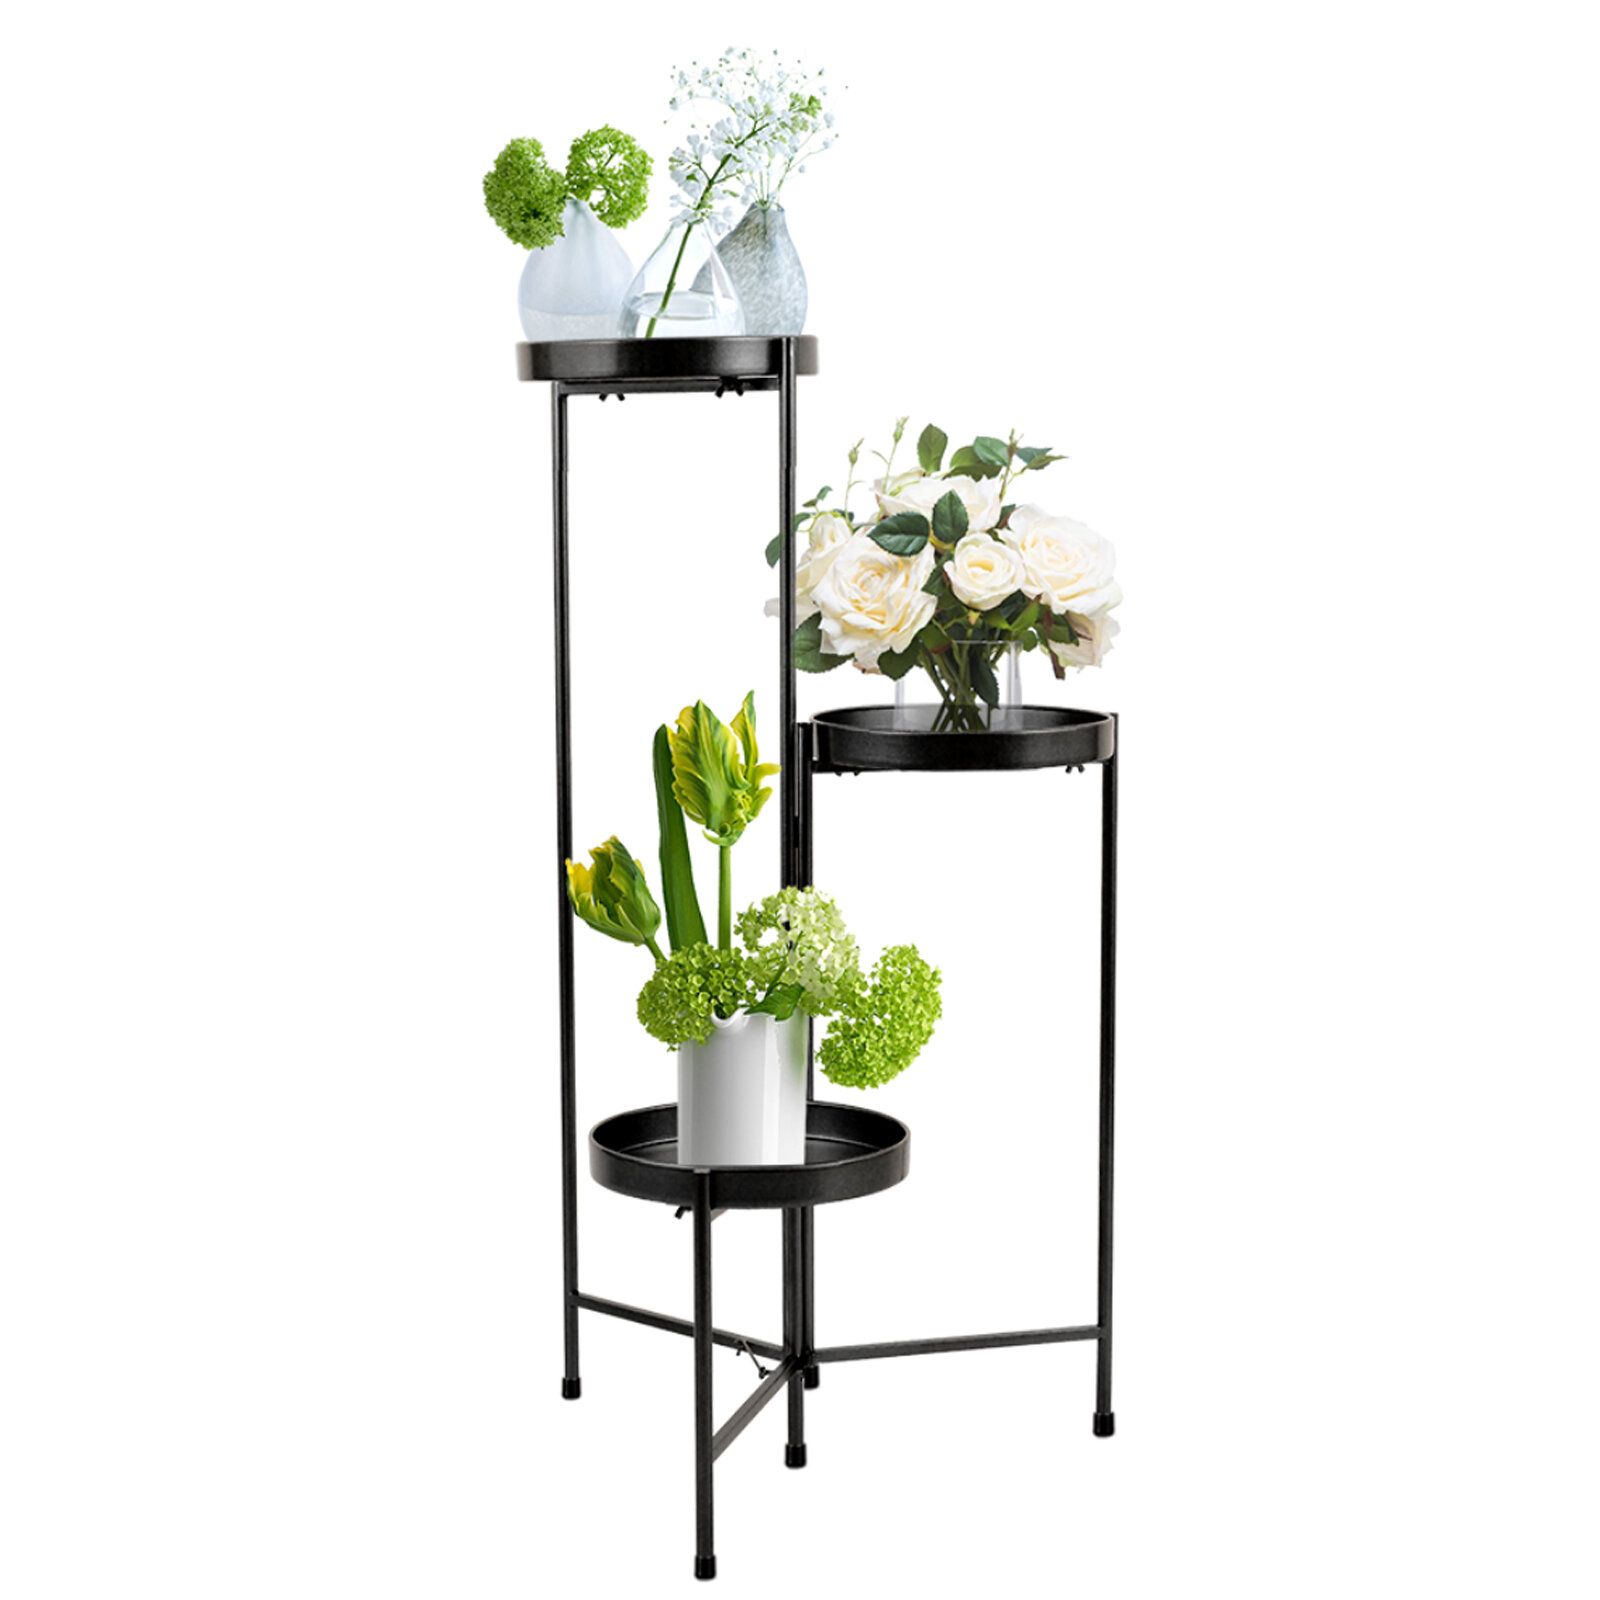 Arlmont & Co. Metal Plant Stand 3 Tier Indoor Outdoor – Flower Pot Display  Holder Wrought Iron Planter Organizer Shelf – For Living Room Garden Lawn  Patio Corner Potted Storage Rack & Reviews | Wayfair In Iron Plant Stands (Photo 13 of 15)